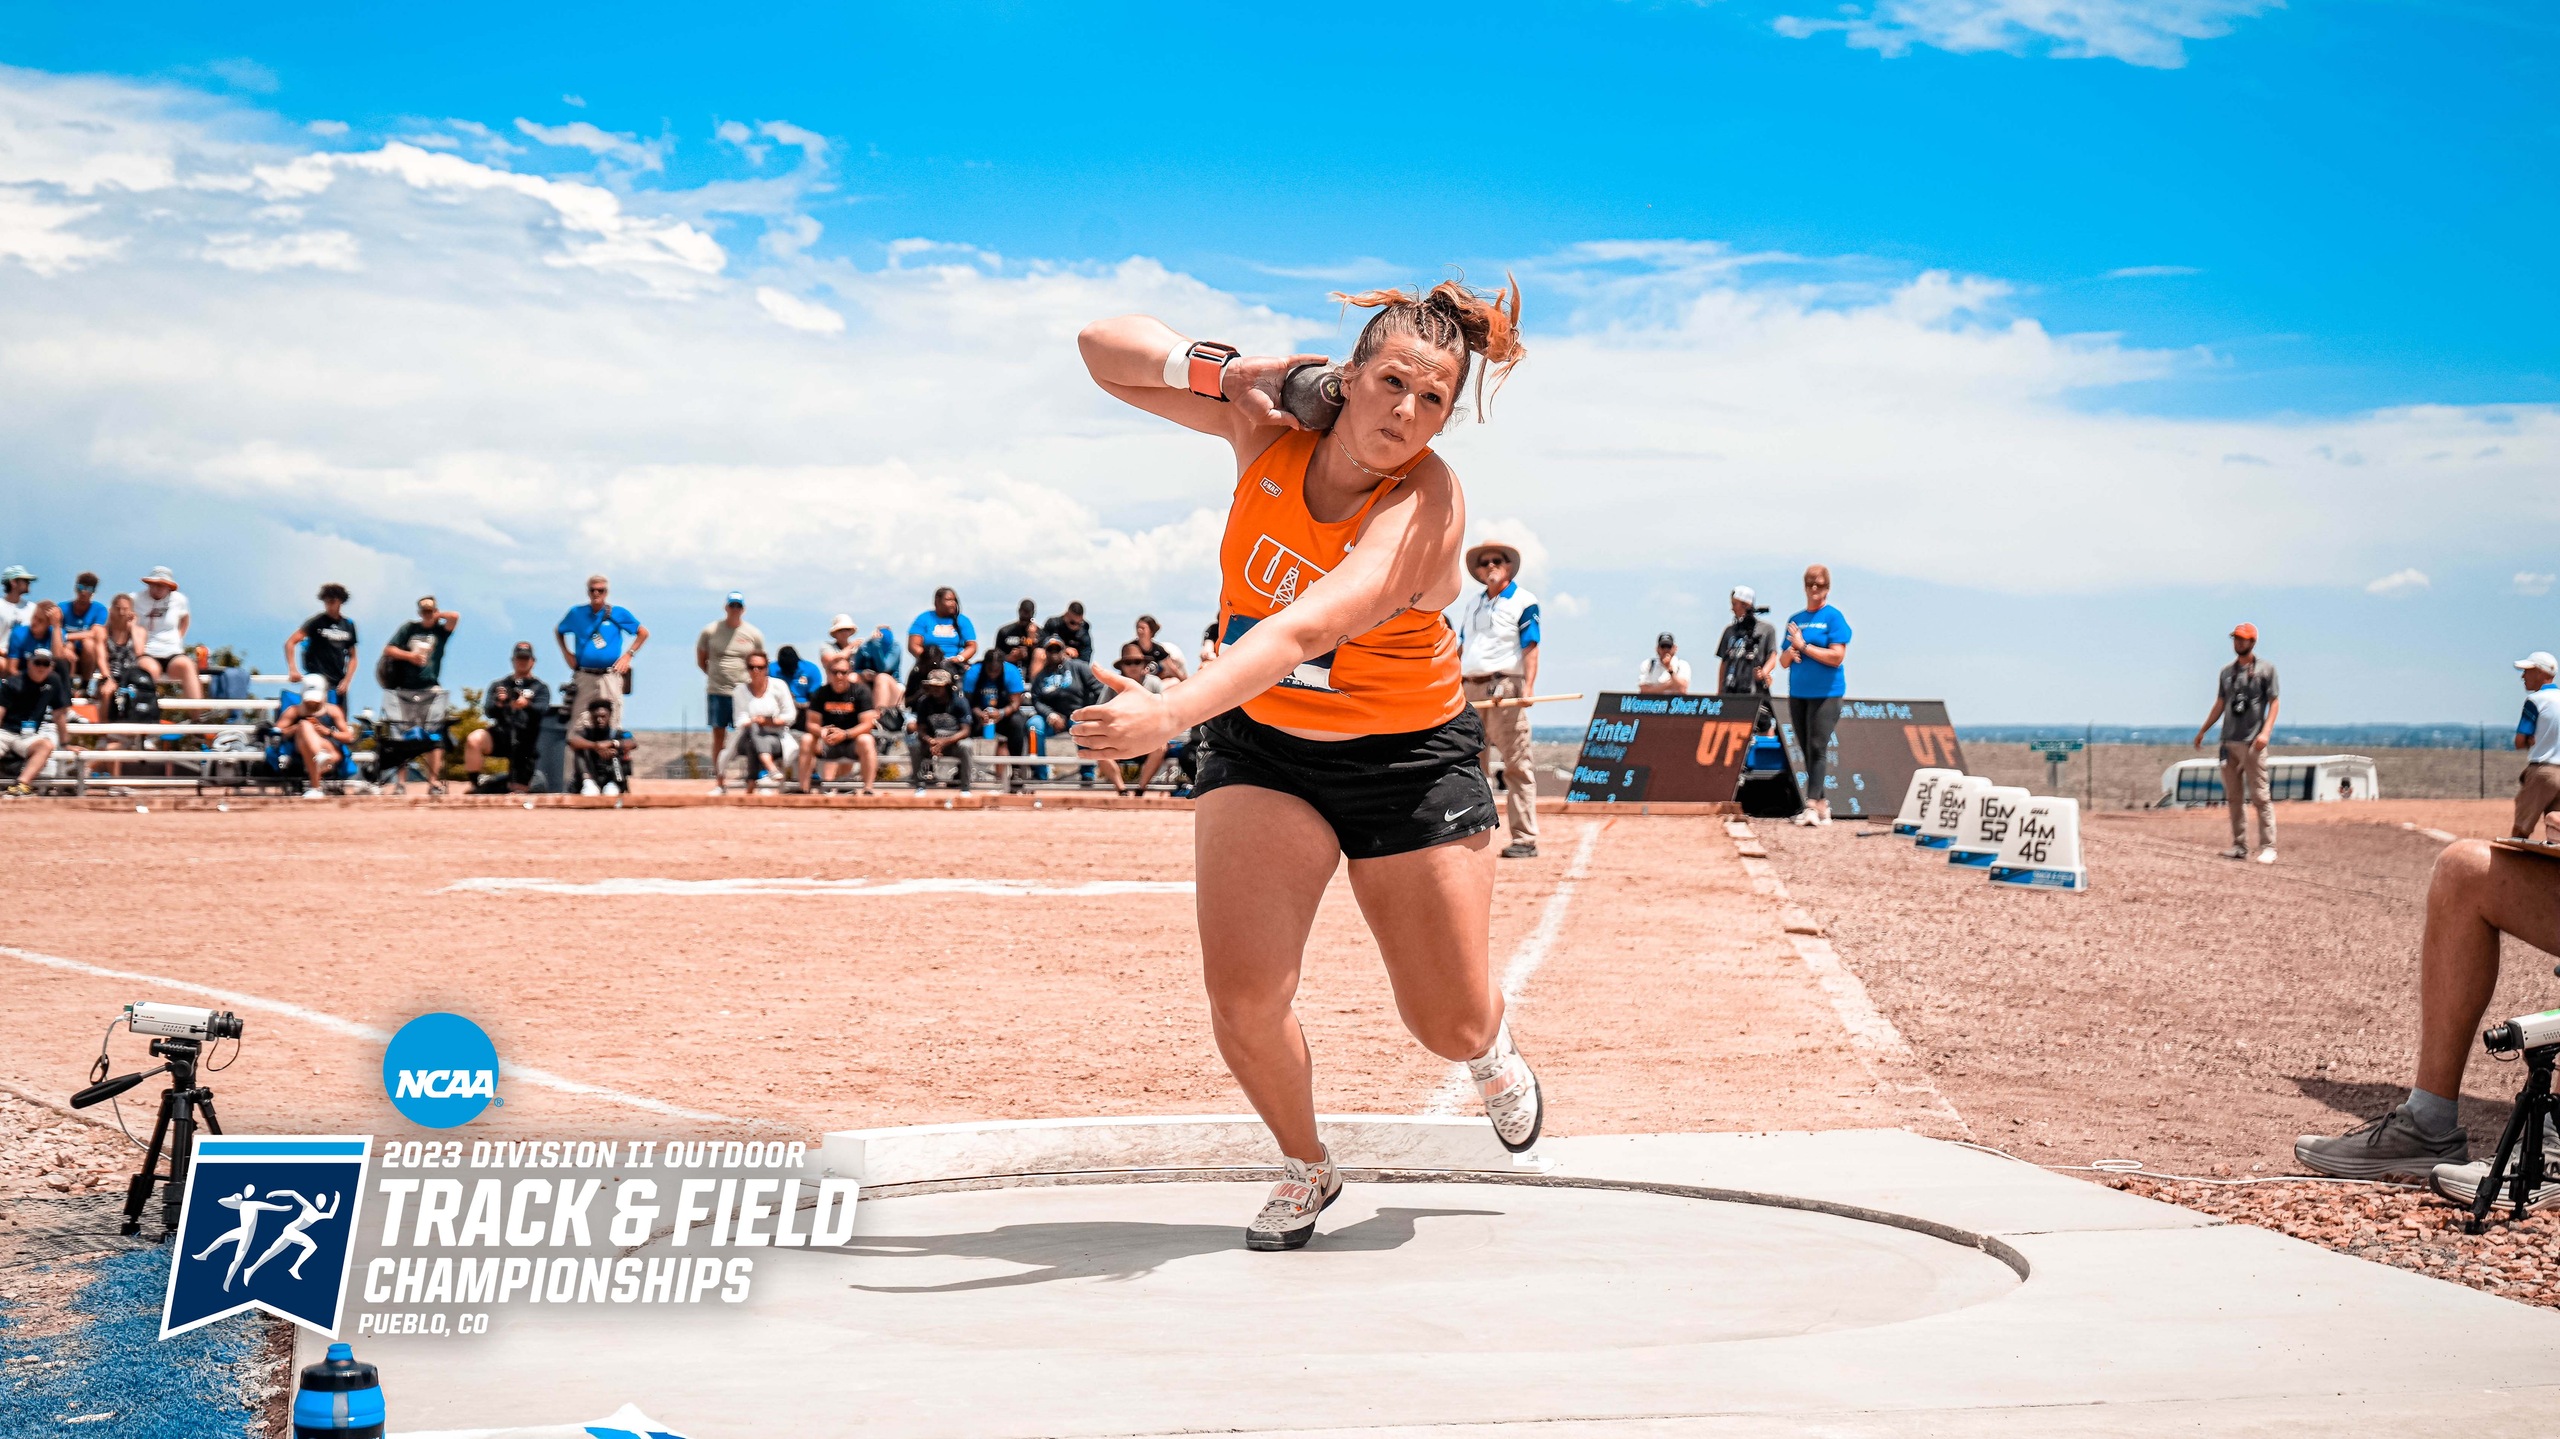 Findlay Earns Four More Podium Finishes on Final Day of Outdoor National Championship